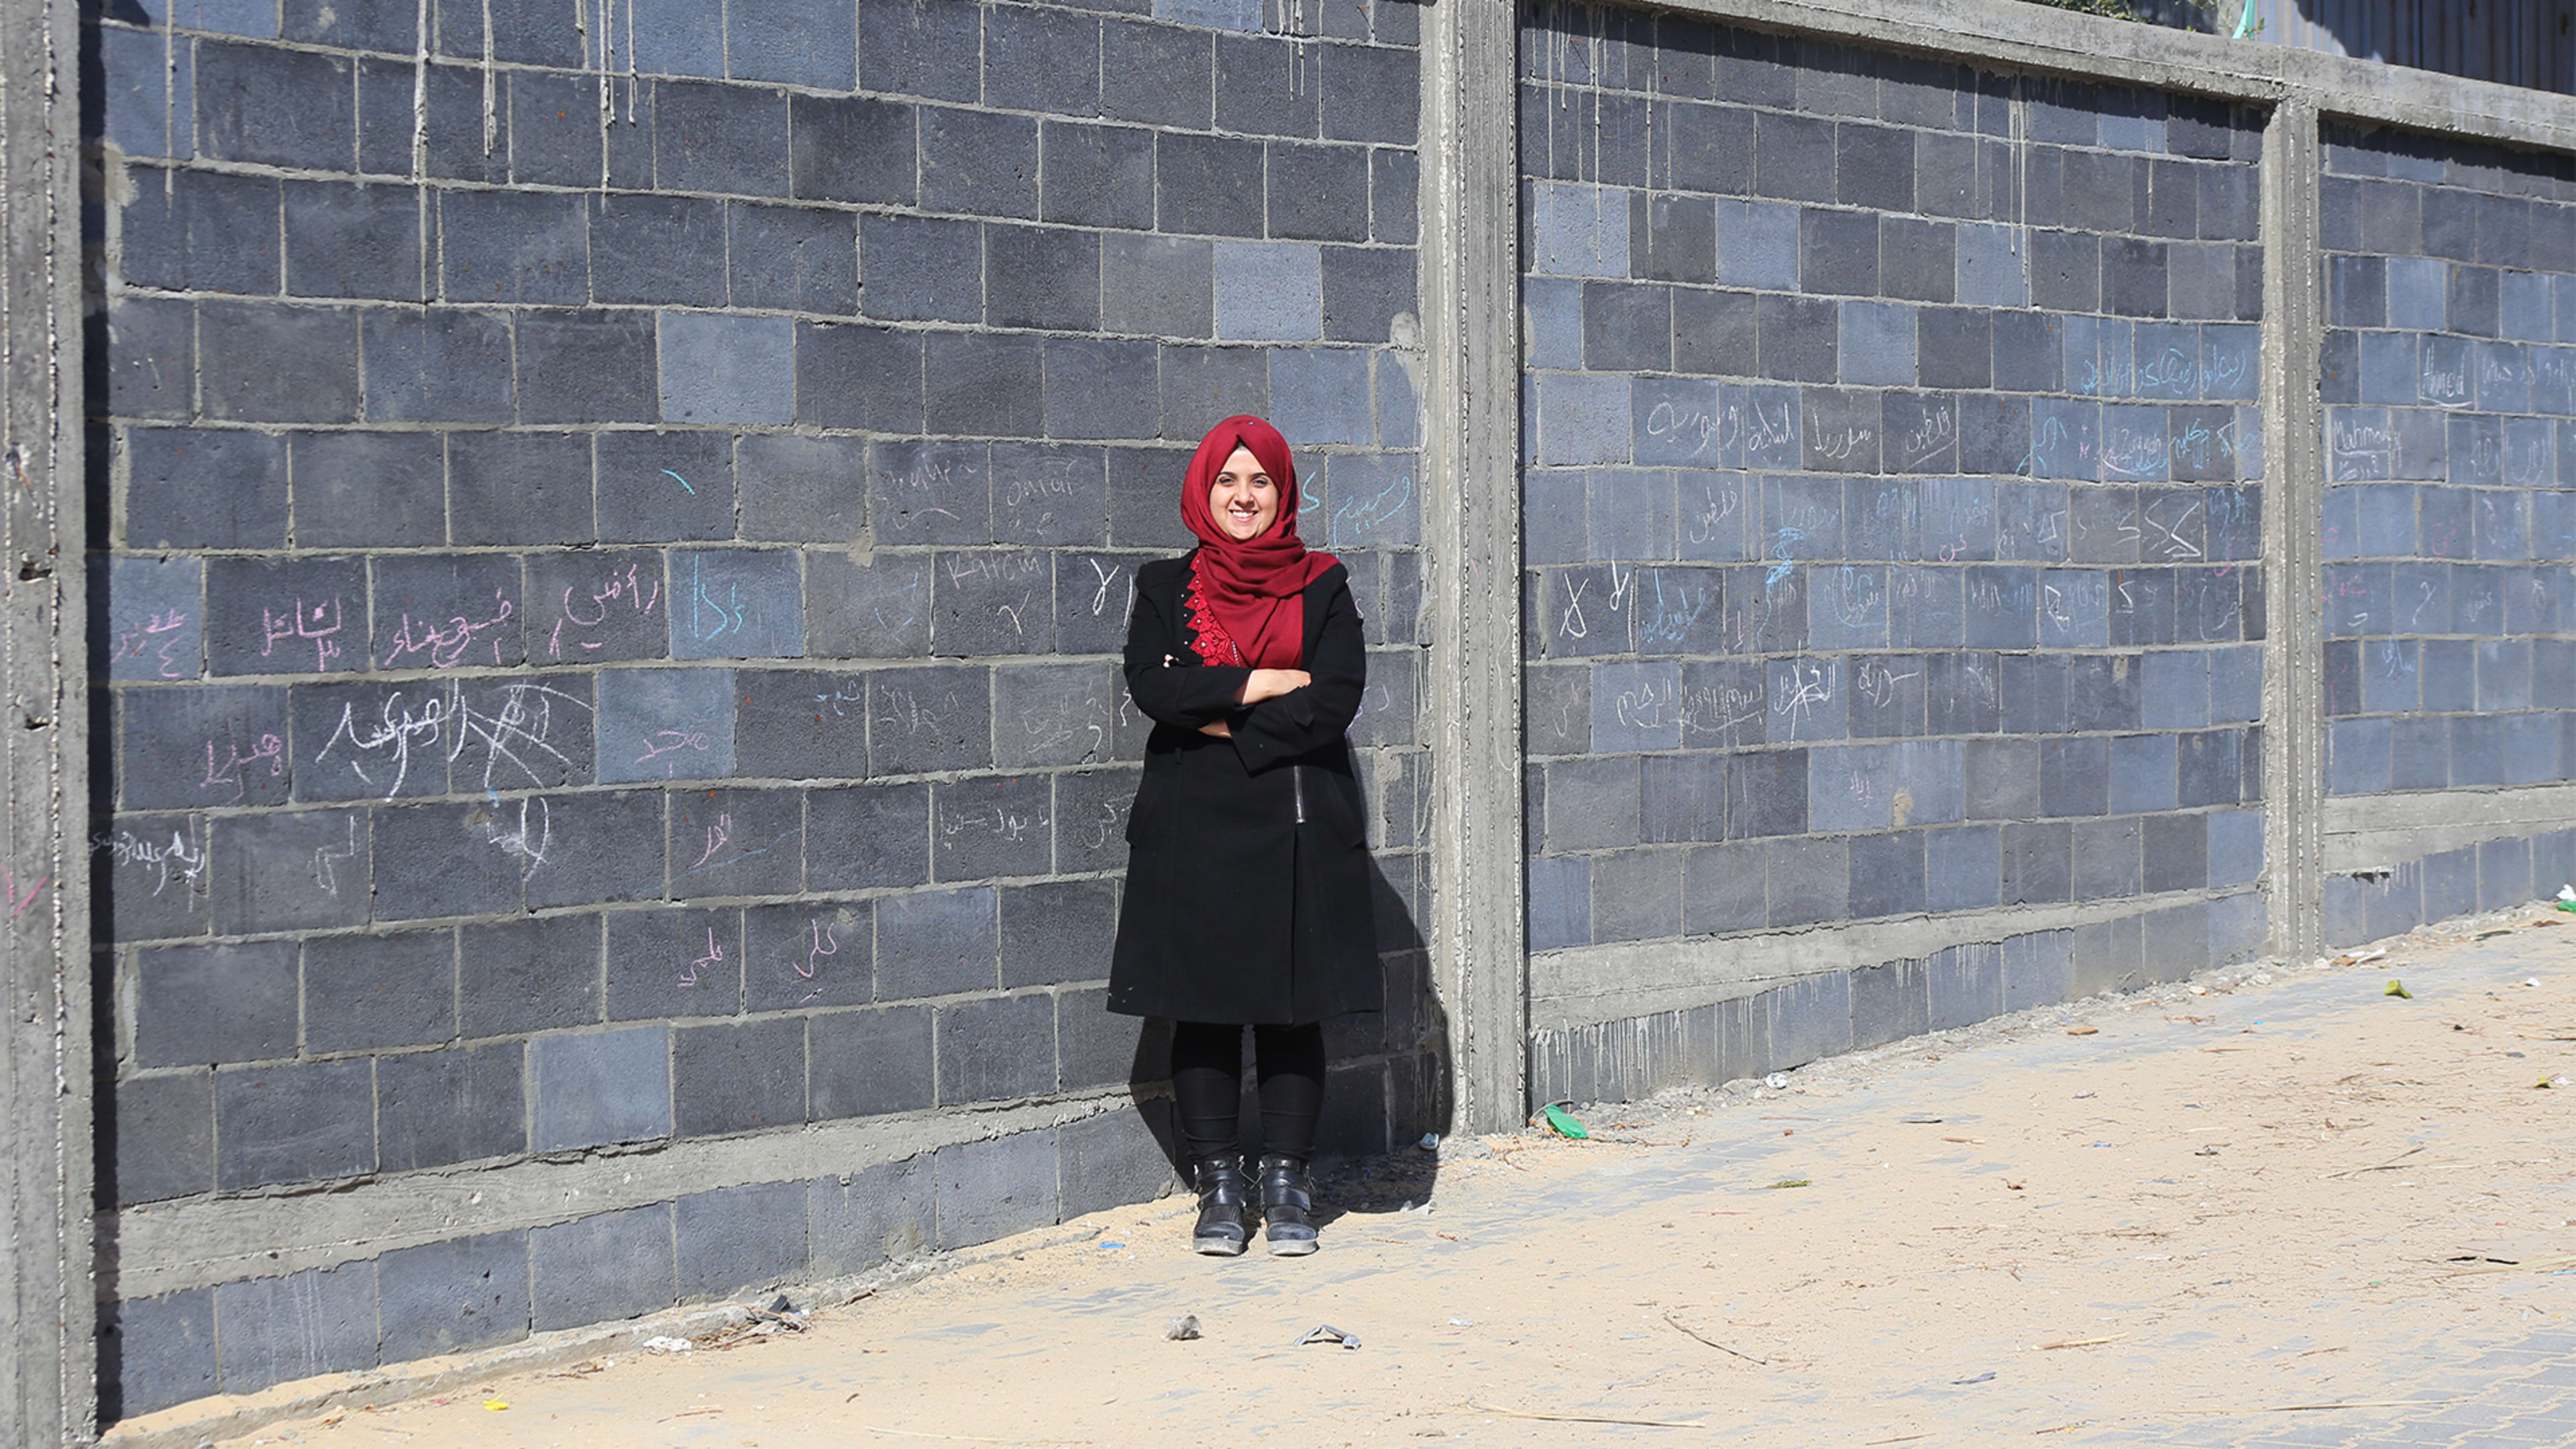 This Young Palestinian Engineer Is Helping Rebuild Gaza With Waste